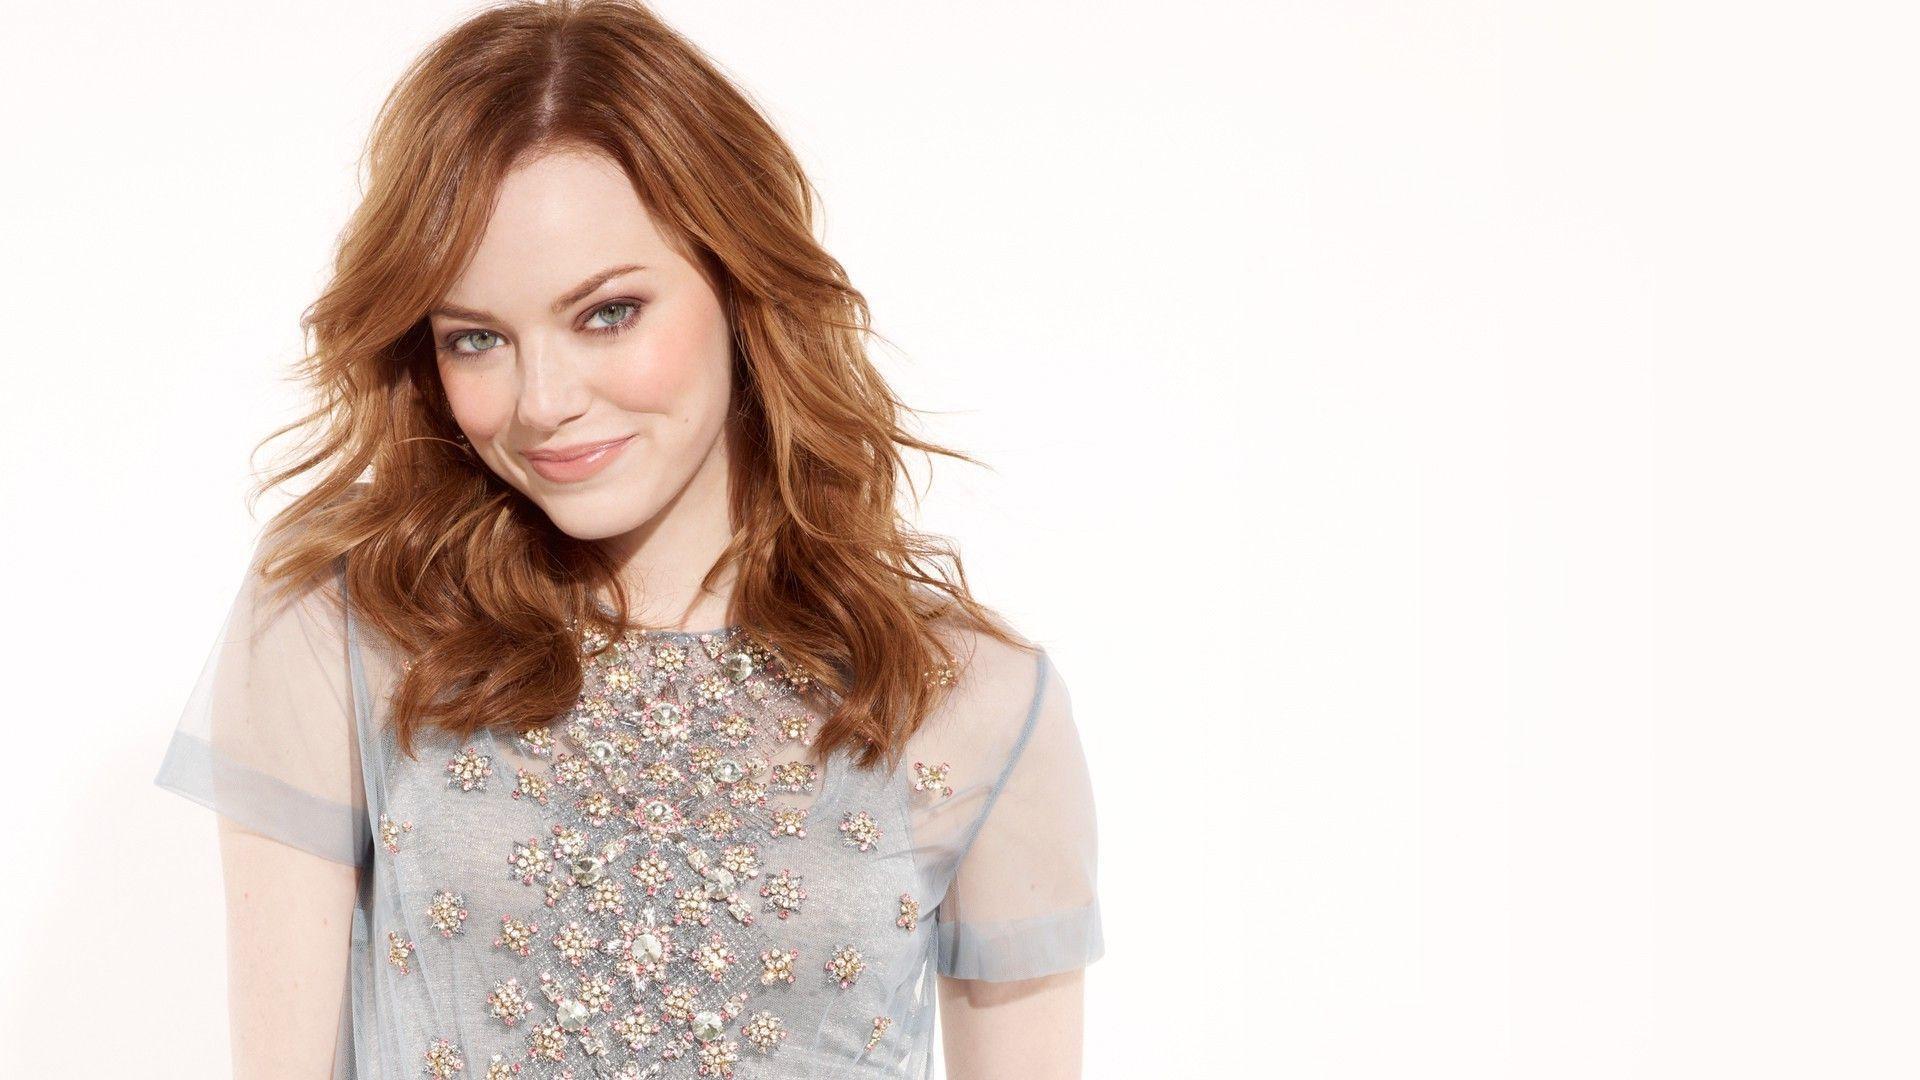 Emma Stone HD Image Photo And Wallpaper Free Download